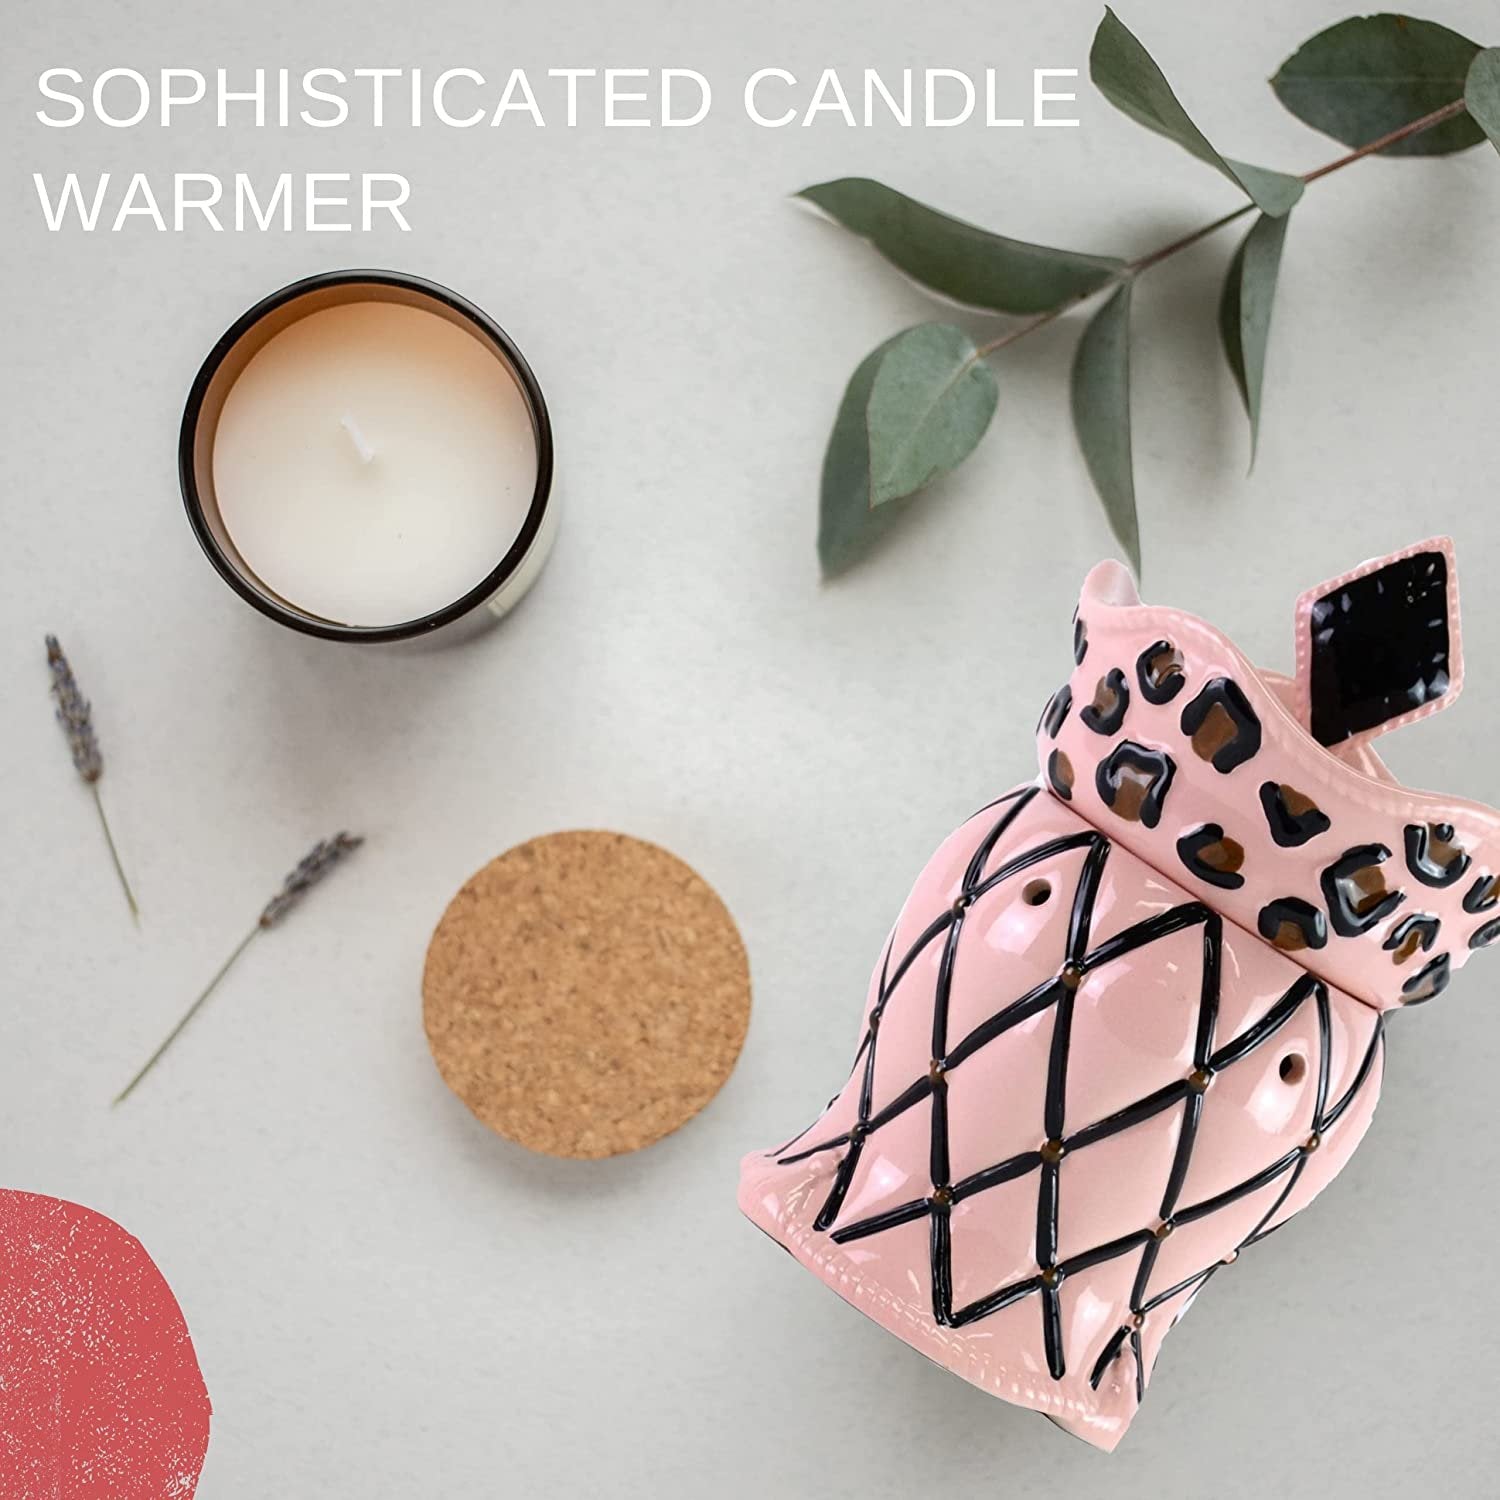 Tyler Candle Company Diva Candle Wax Melt Warmer - Home Decor Candle Accessories with Included 6 Wax Melts - Chained Leopard Pink Fragrance Wax Warmer - 5.5 x 5" in with Bonus Key Chain